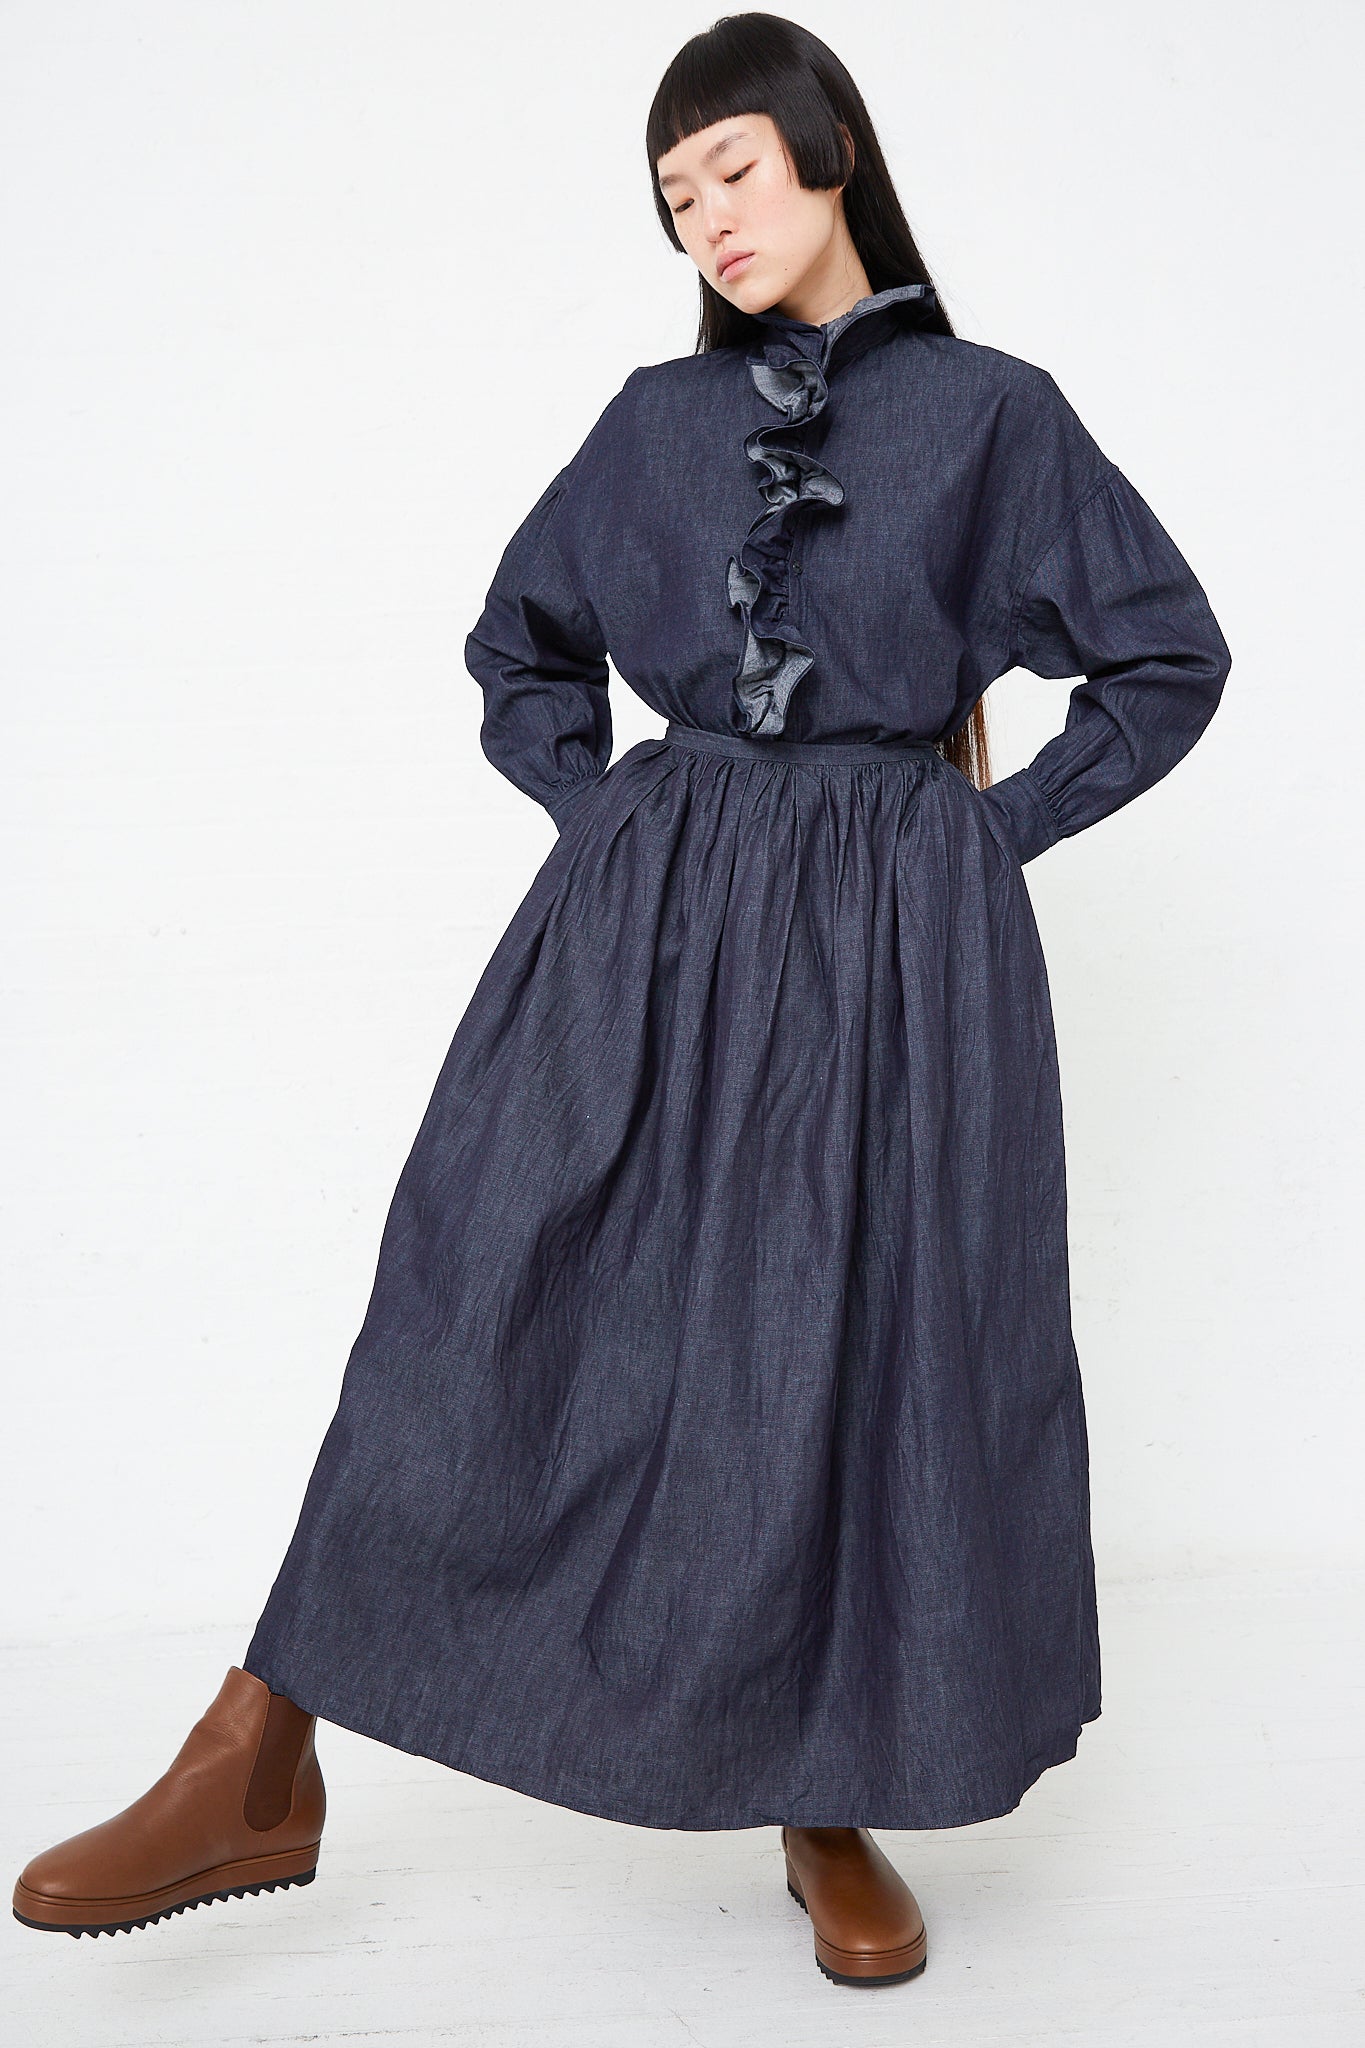 A woman wearing a Toujours Cotton Denim Cloth Pleated Maxi Skirt in Indigo and boots.